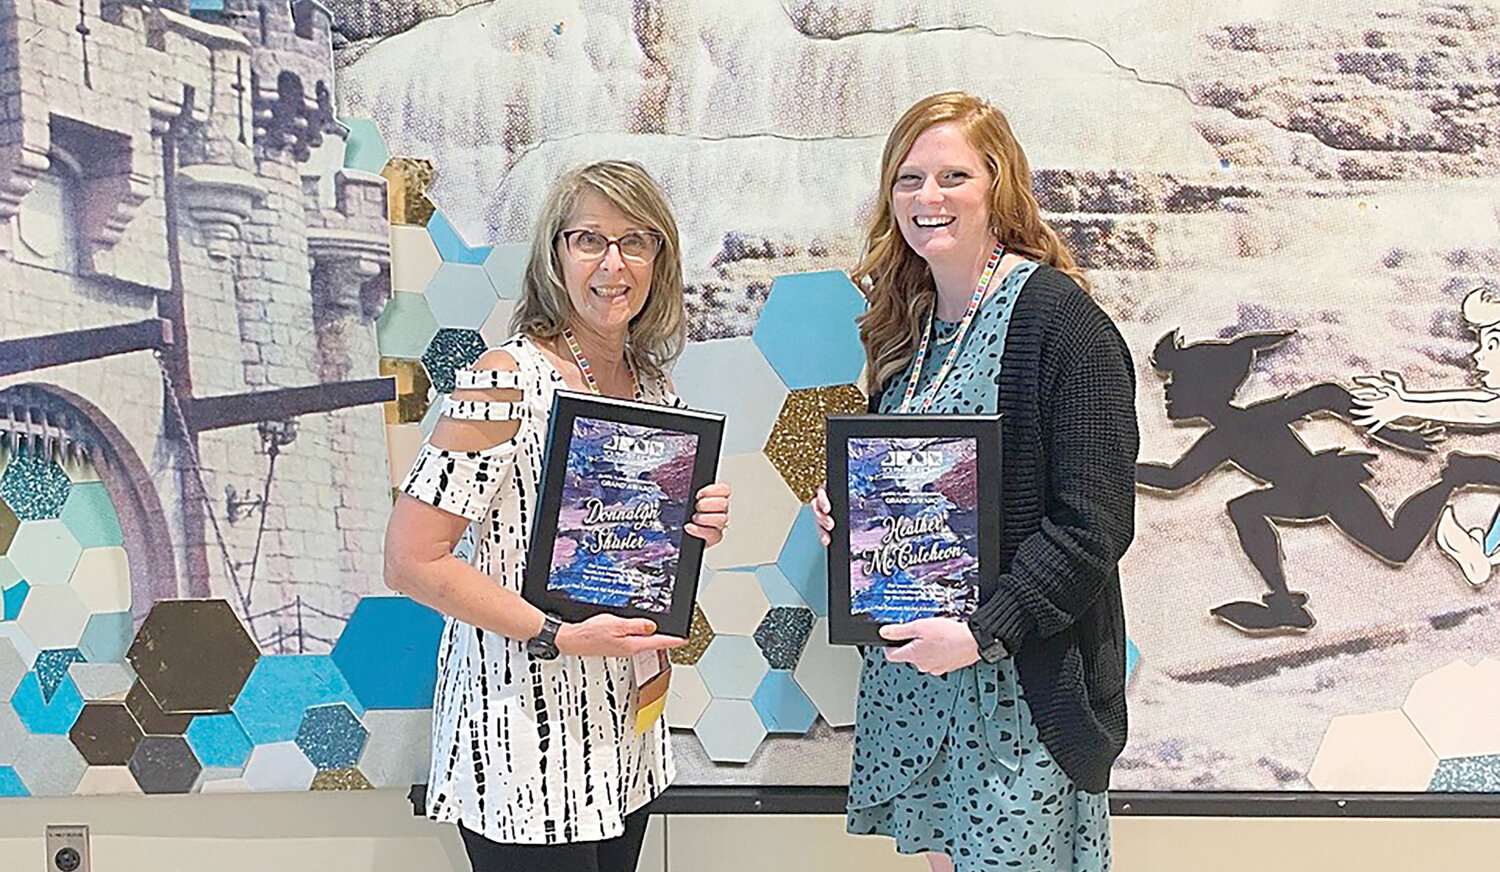 Heather McCutcheon, right, poses with fellow New York State Art Month co-chair Donnalyn Shuster recently while holding their awards at the National Art Education Association 2023 Convention in San Antonio. Their third co-chair Tracy Berges was unable to attend.